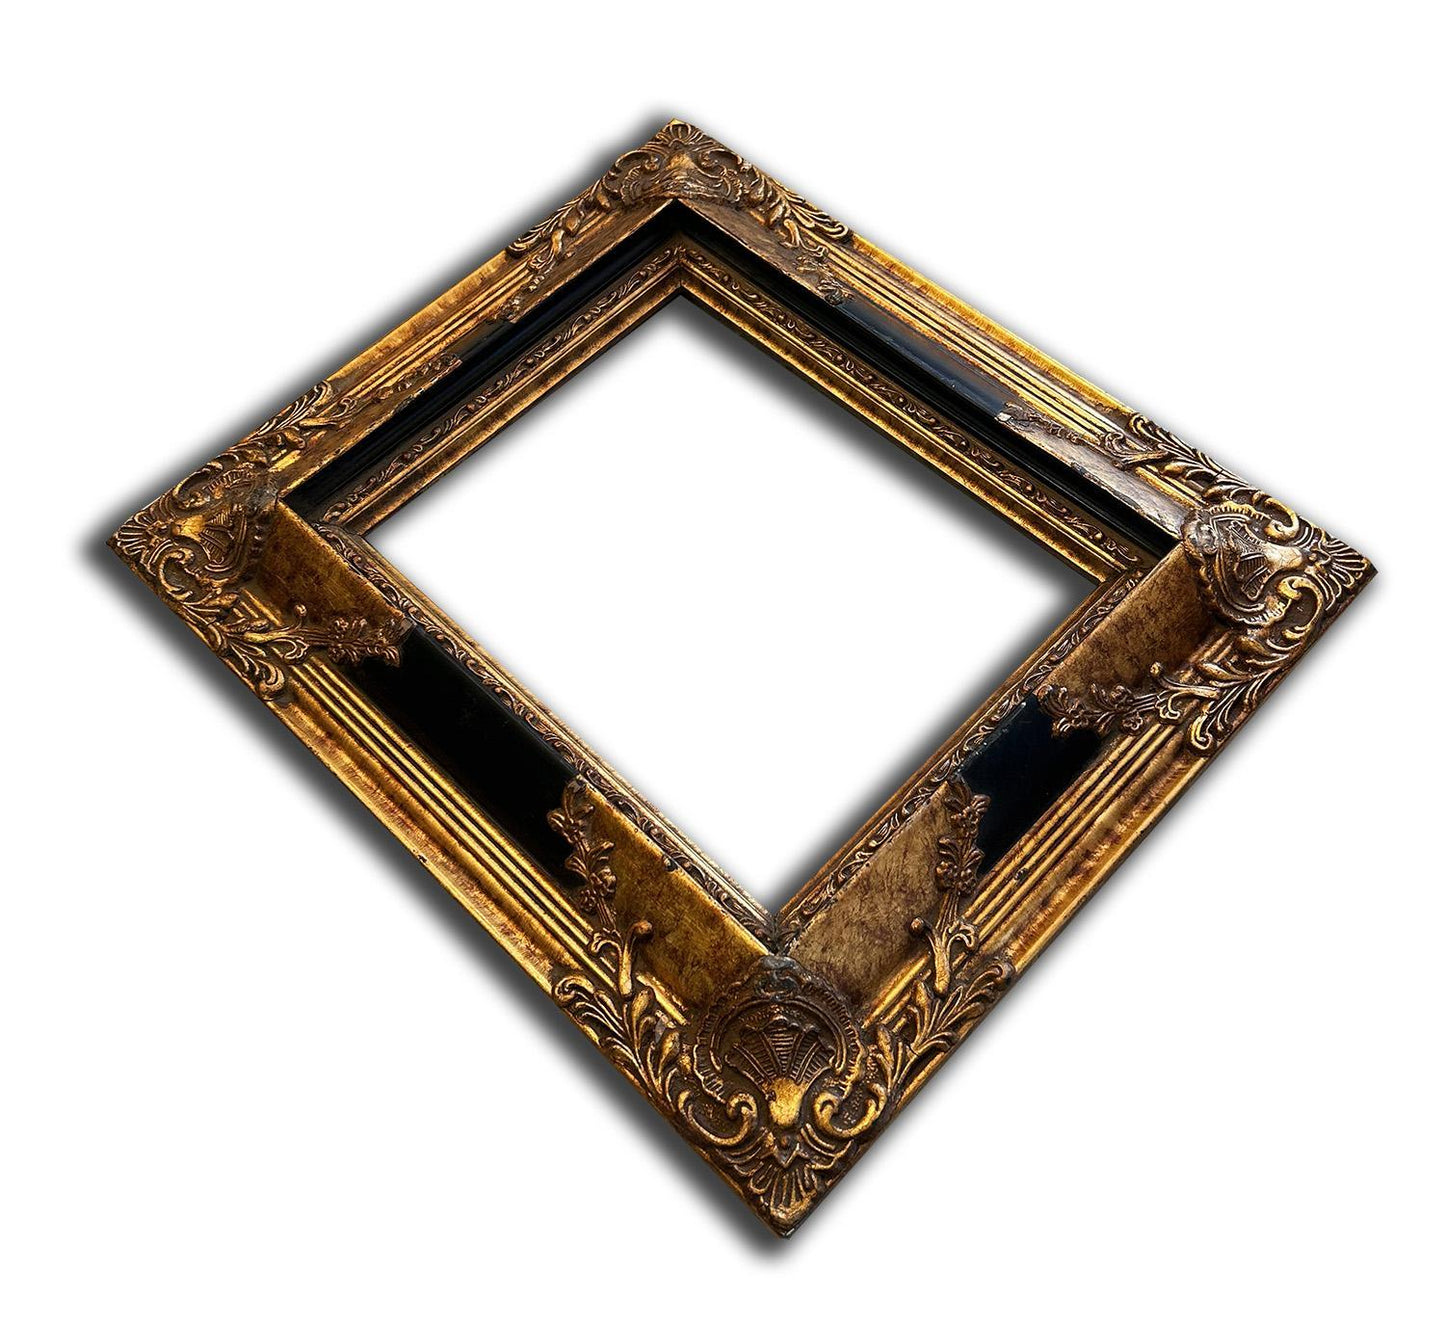 20x25 cm or 8x10 ins, wooden photo frame